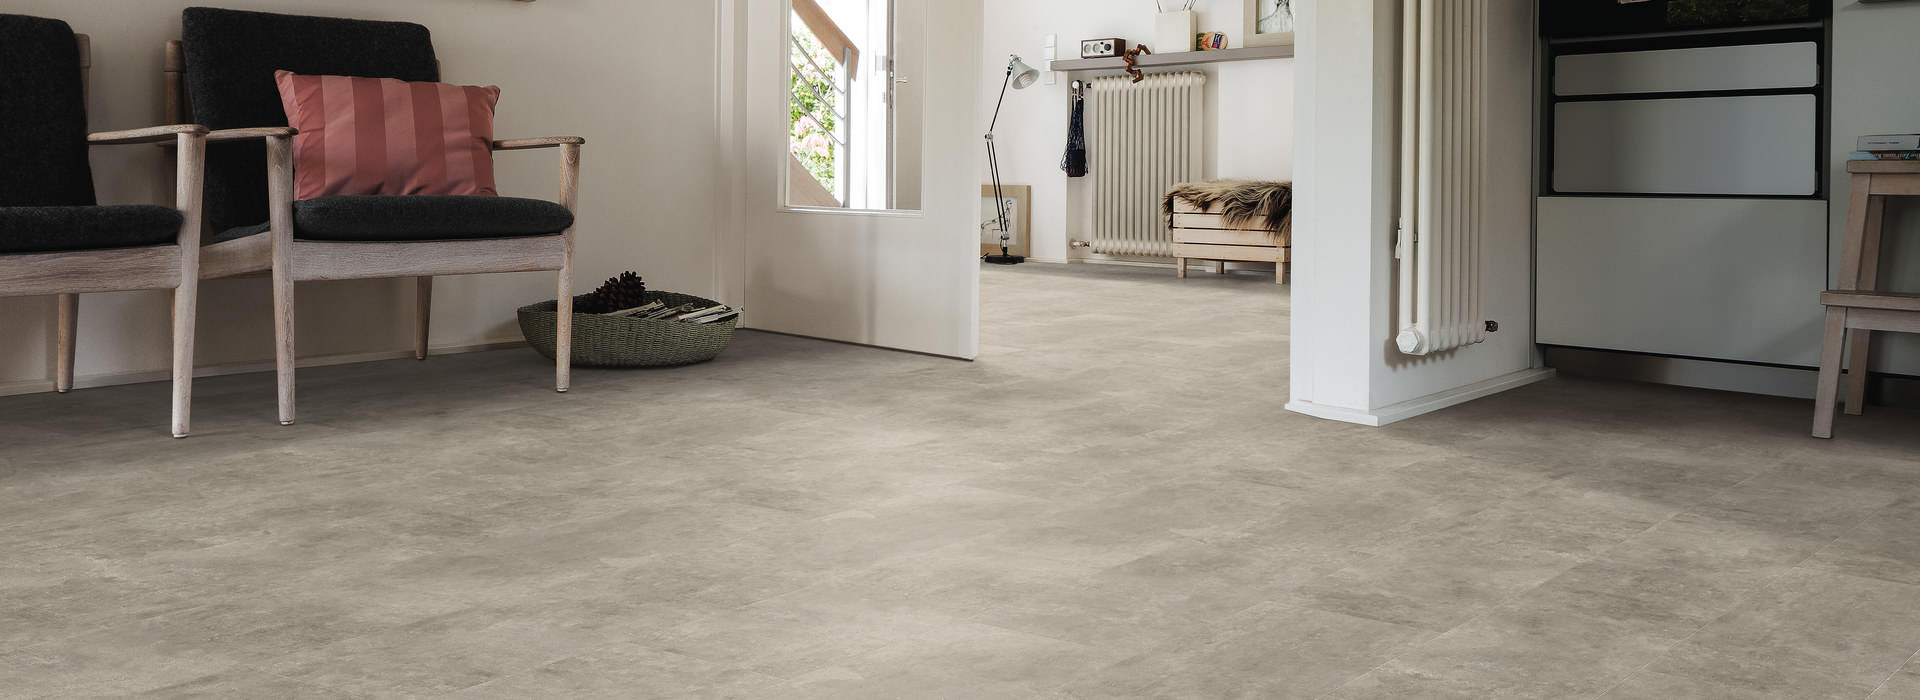 DISANO by HARO ClassicAqua Piazza 4V Béton Brut Greige* stone texture Top Connect